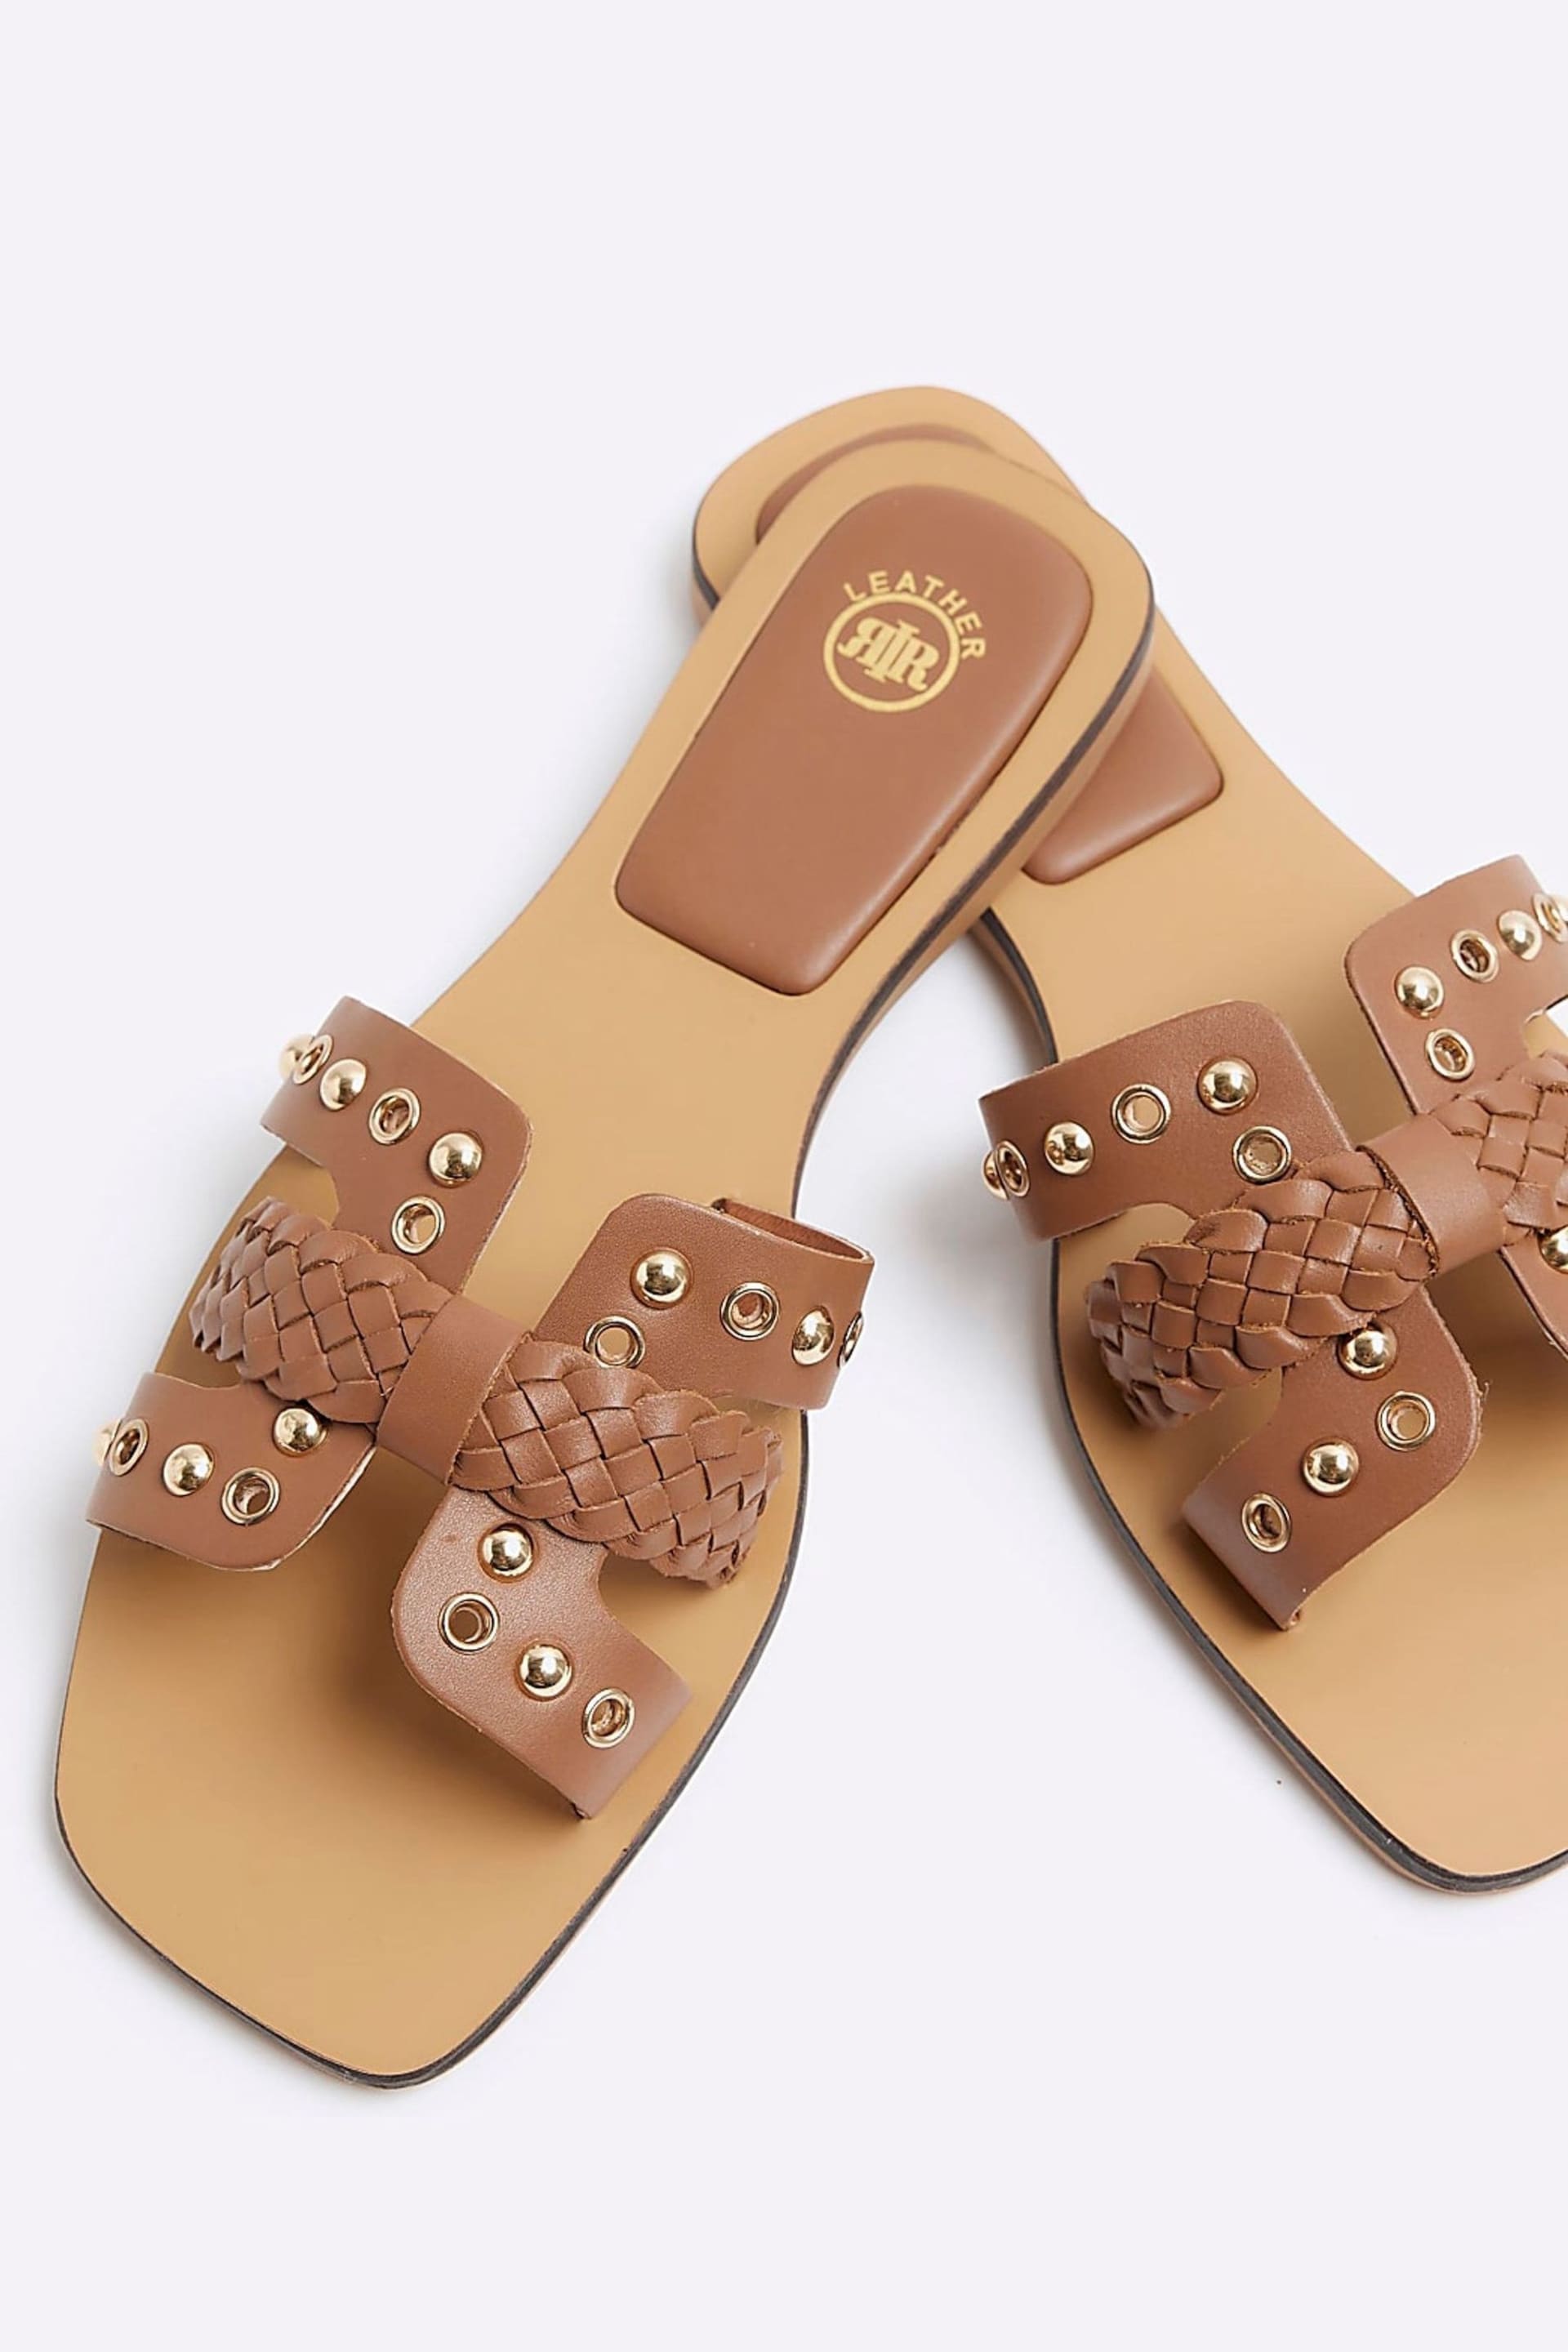 River Island Brown Leather Studded Flat Sandals - Image 4 of 6